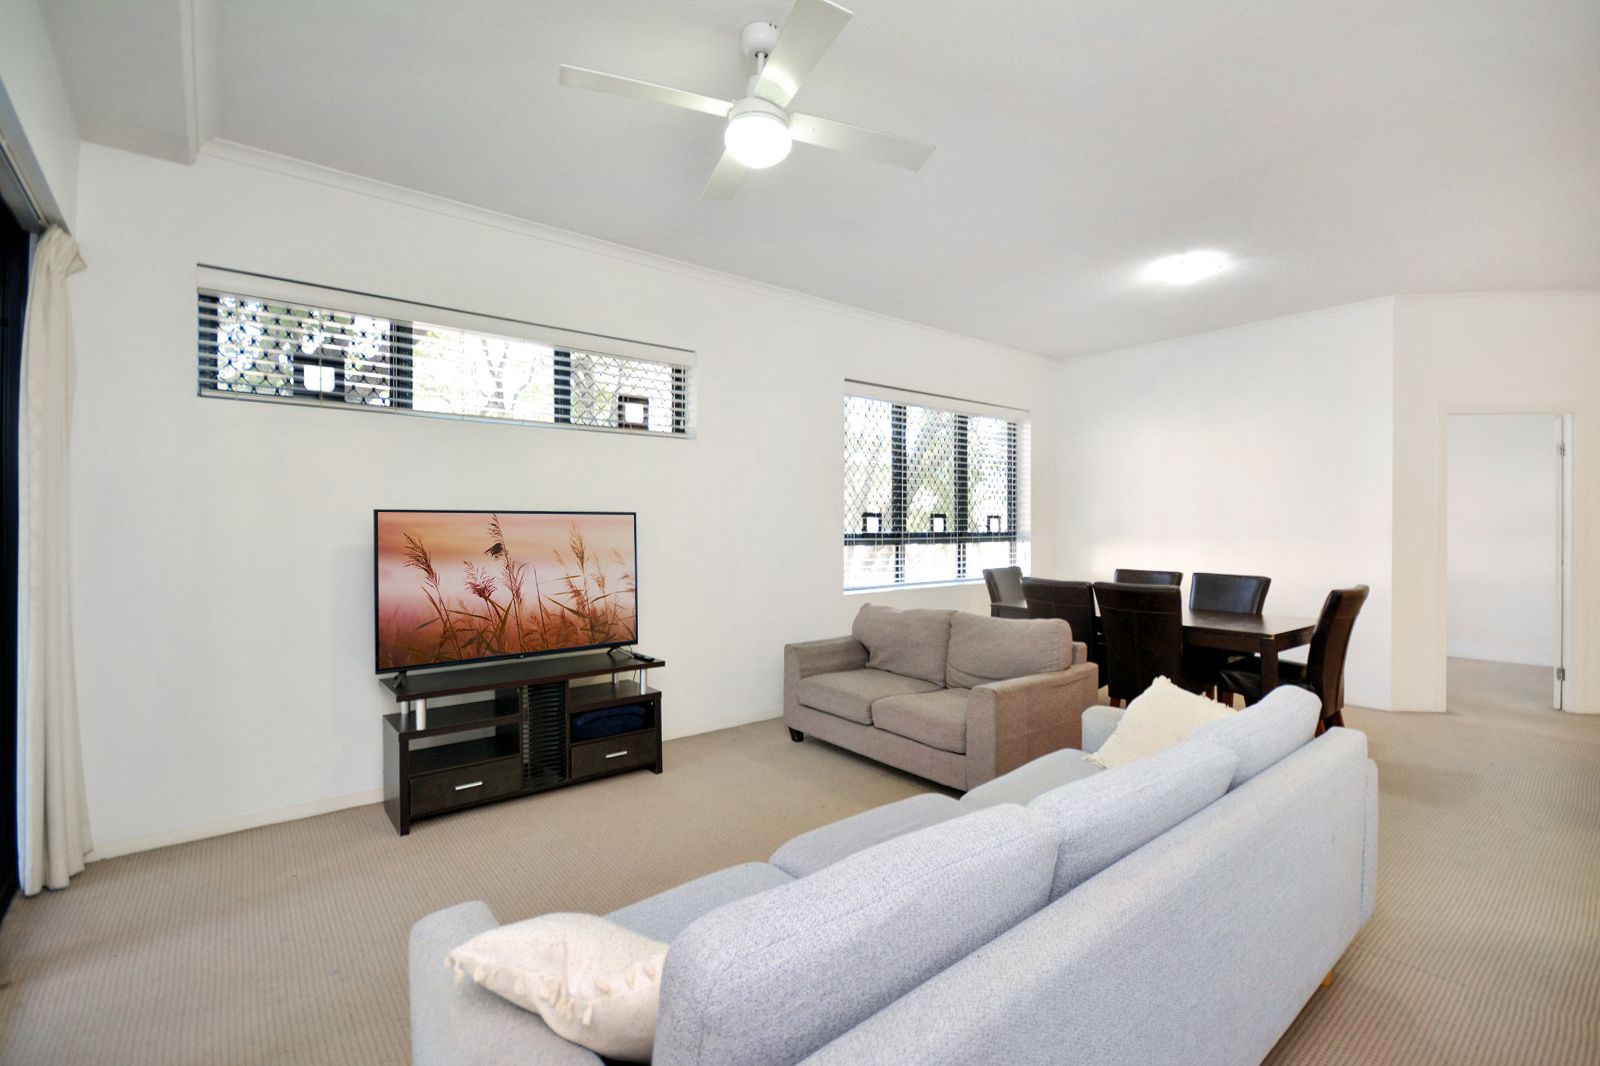 3 bedrooms Apartment / Unit / Flat in 287 Wickham Terrace SPRING HILL QLD, 4000